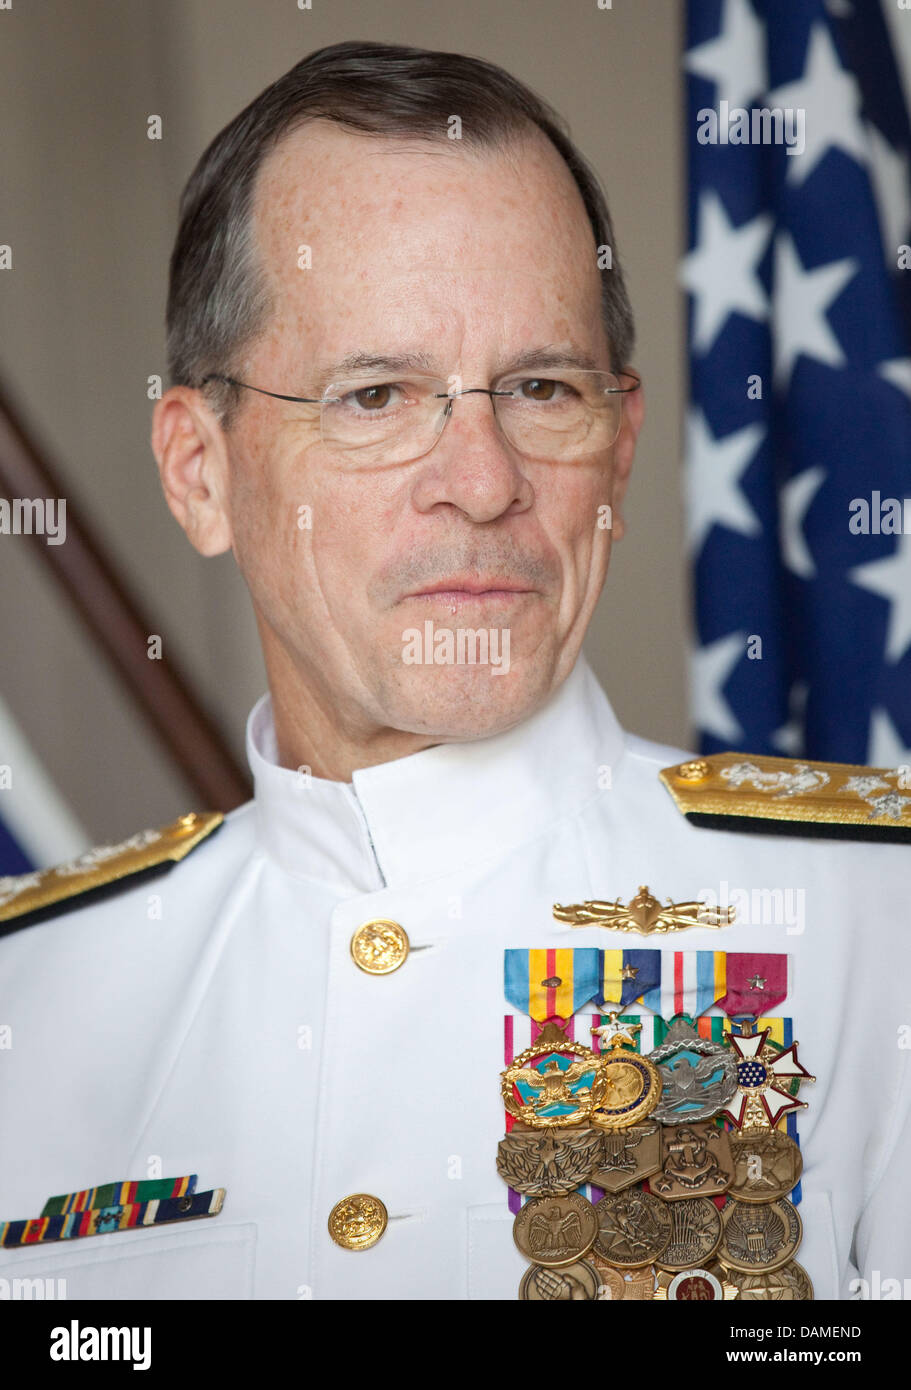 US admiral Michael Mullen wears the Order of Merit of the Federal Republic of Germany in Berlin, Germany, 09 June 2011. Mullen is the chairman of the Chiefs of Staff and the highest ranking soldier of the US troups. He recieved the Federal Cross of Merit for his service to German-American friendship. Photo: MICHAEL KAPPELER Stock Photo